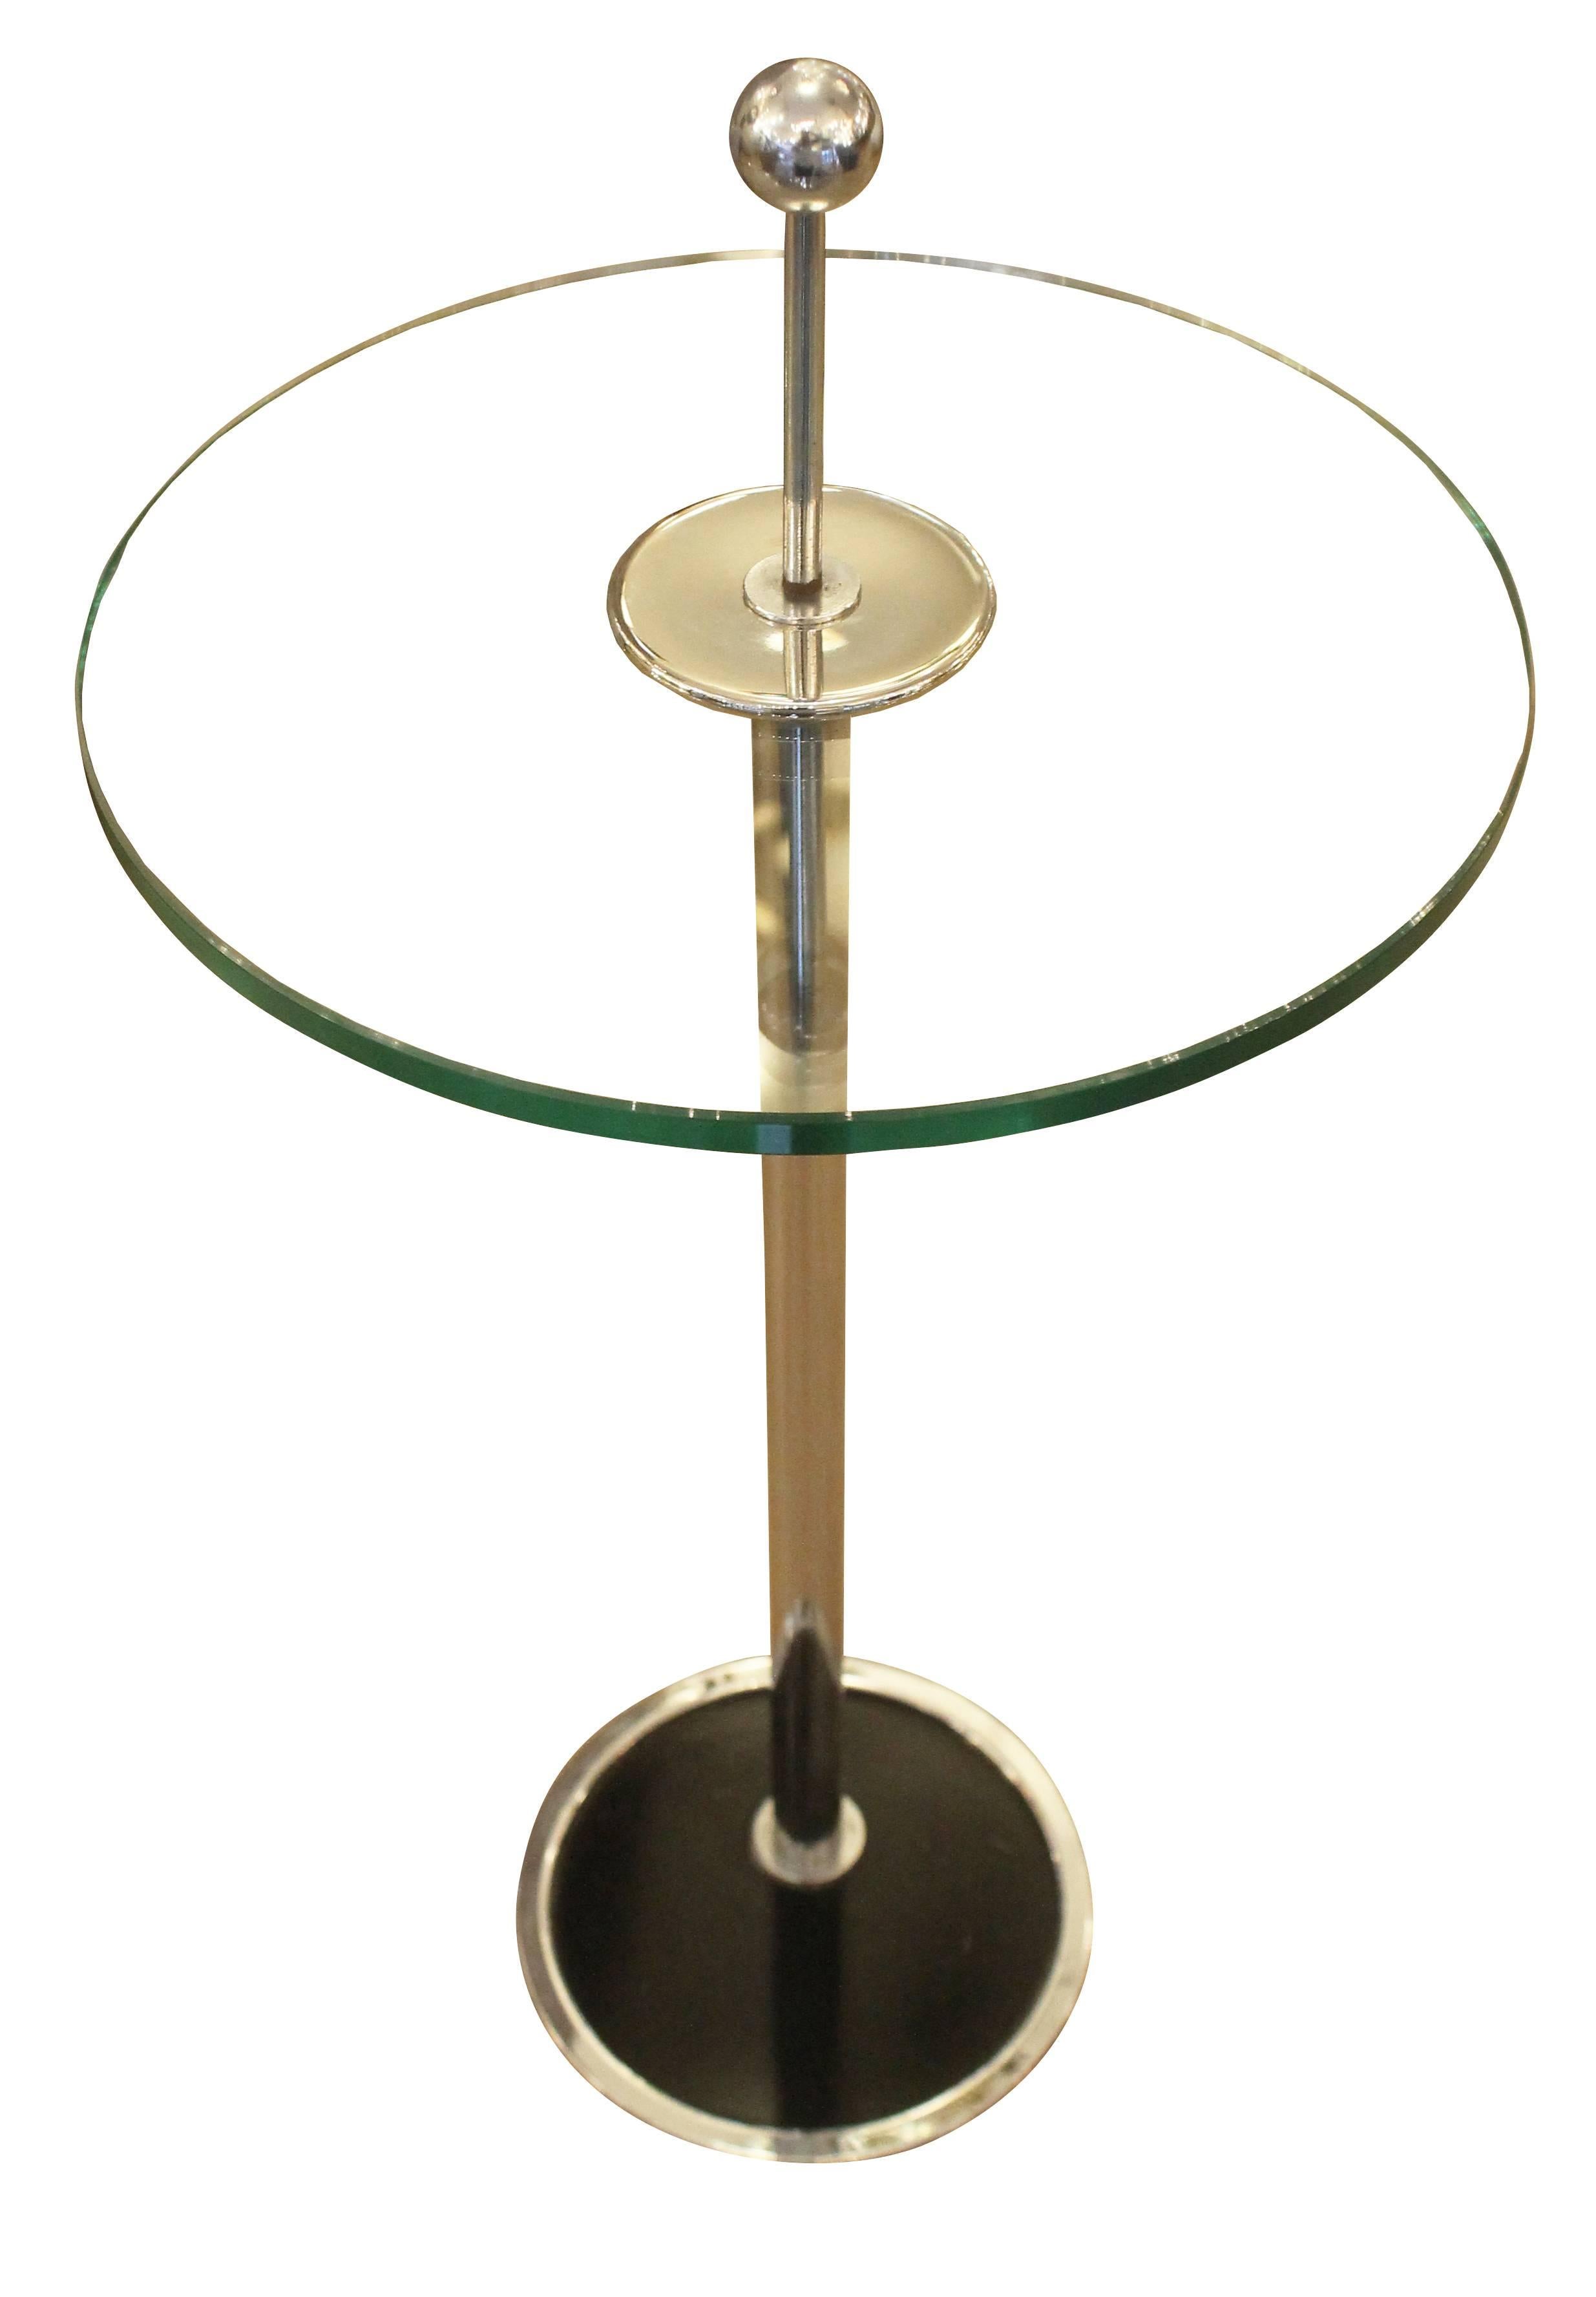 Diminutive chrome side table with an off center base and round glss top. Ideal next to a lounge chair or sofa.
